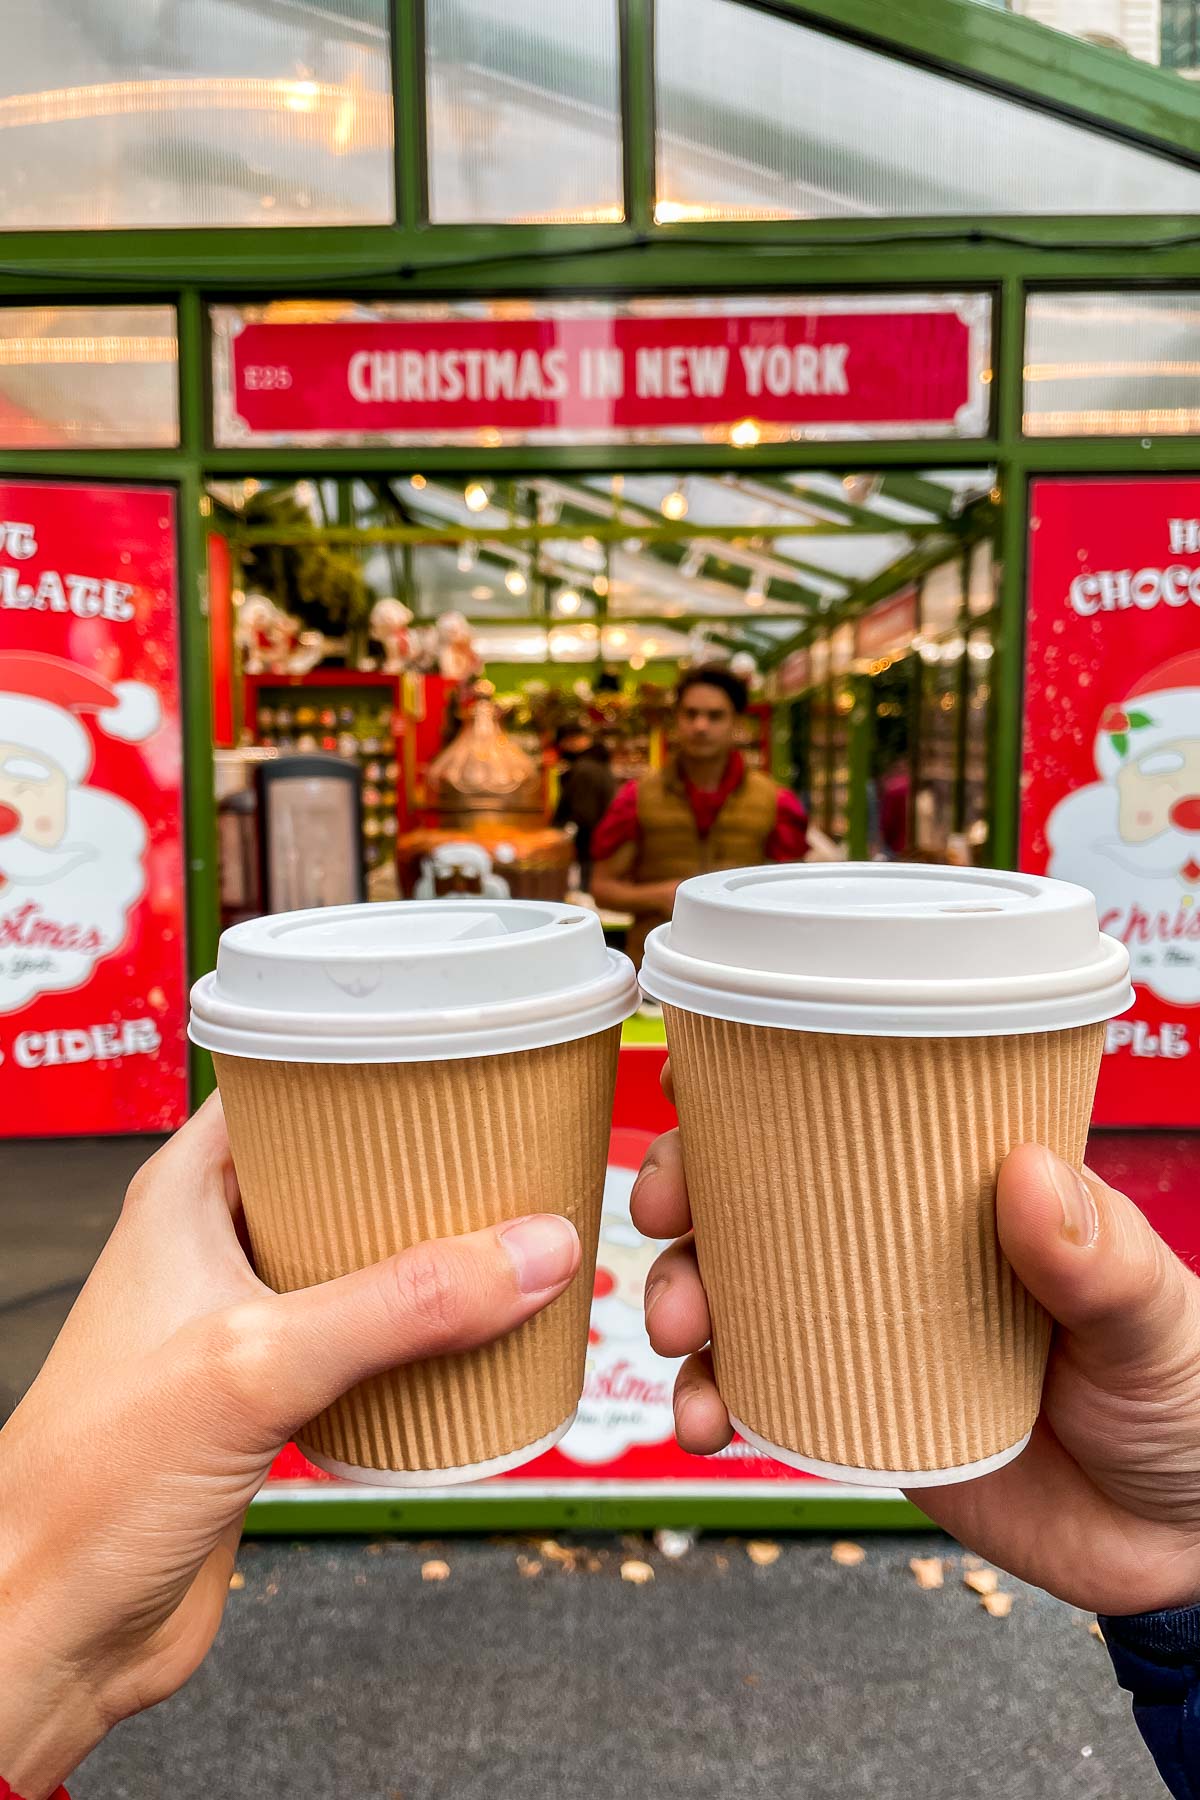 Hot drinks at the Winter Village at Bryant Park